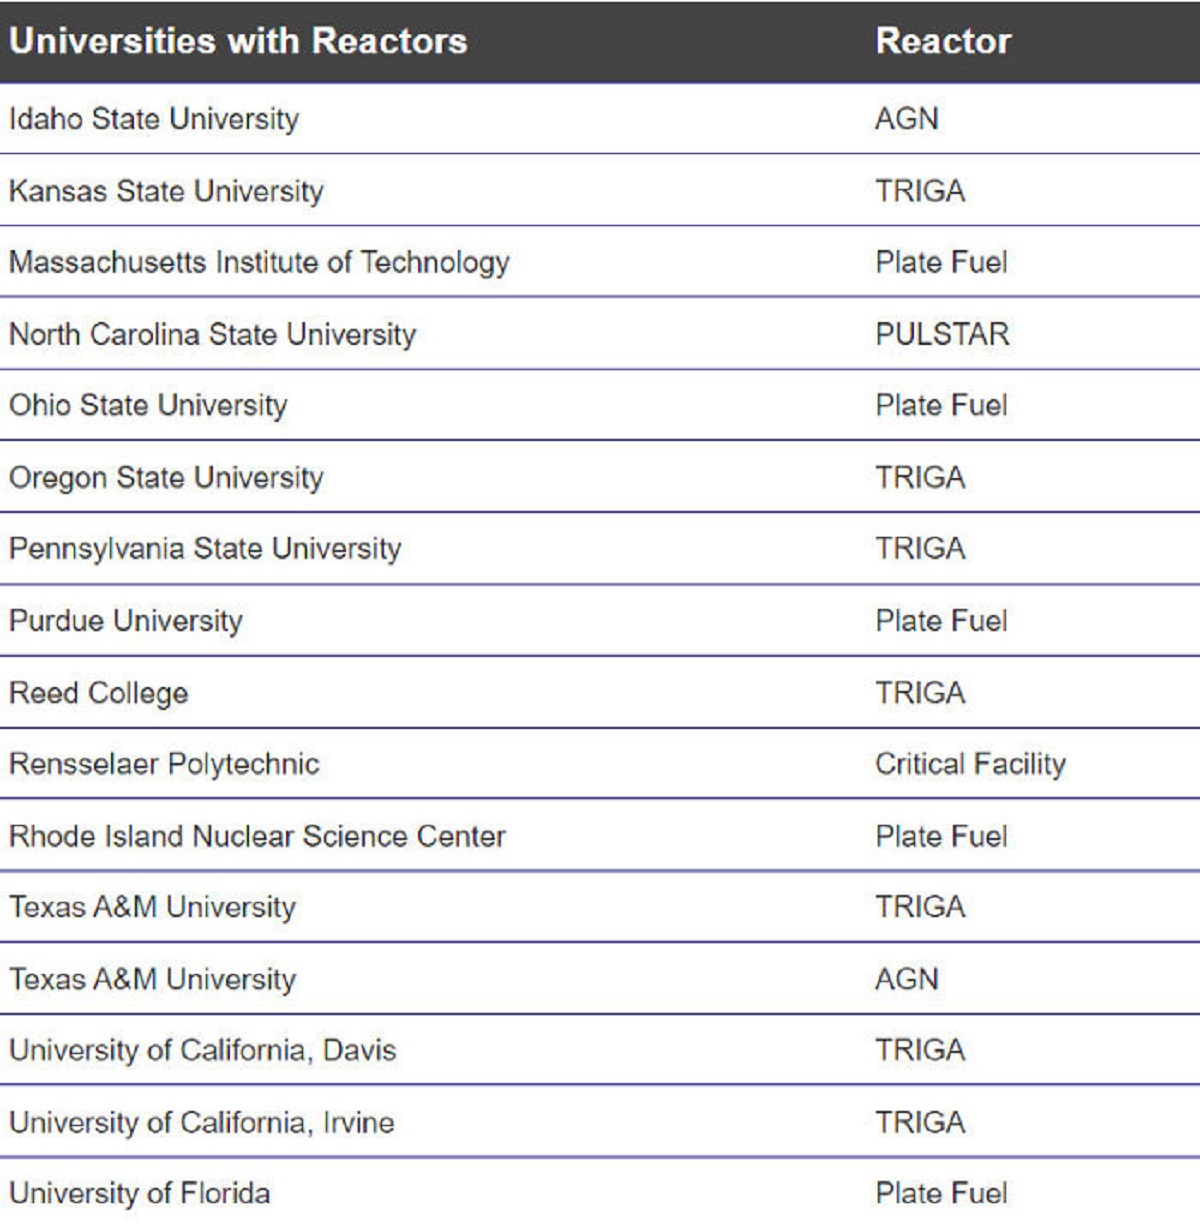 That there are over two dozen universities in the U.S. that have their own nuclear reactors.